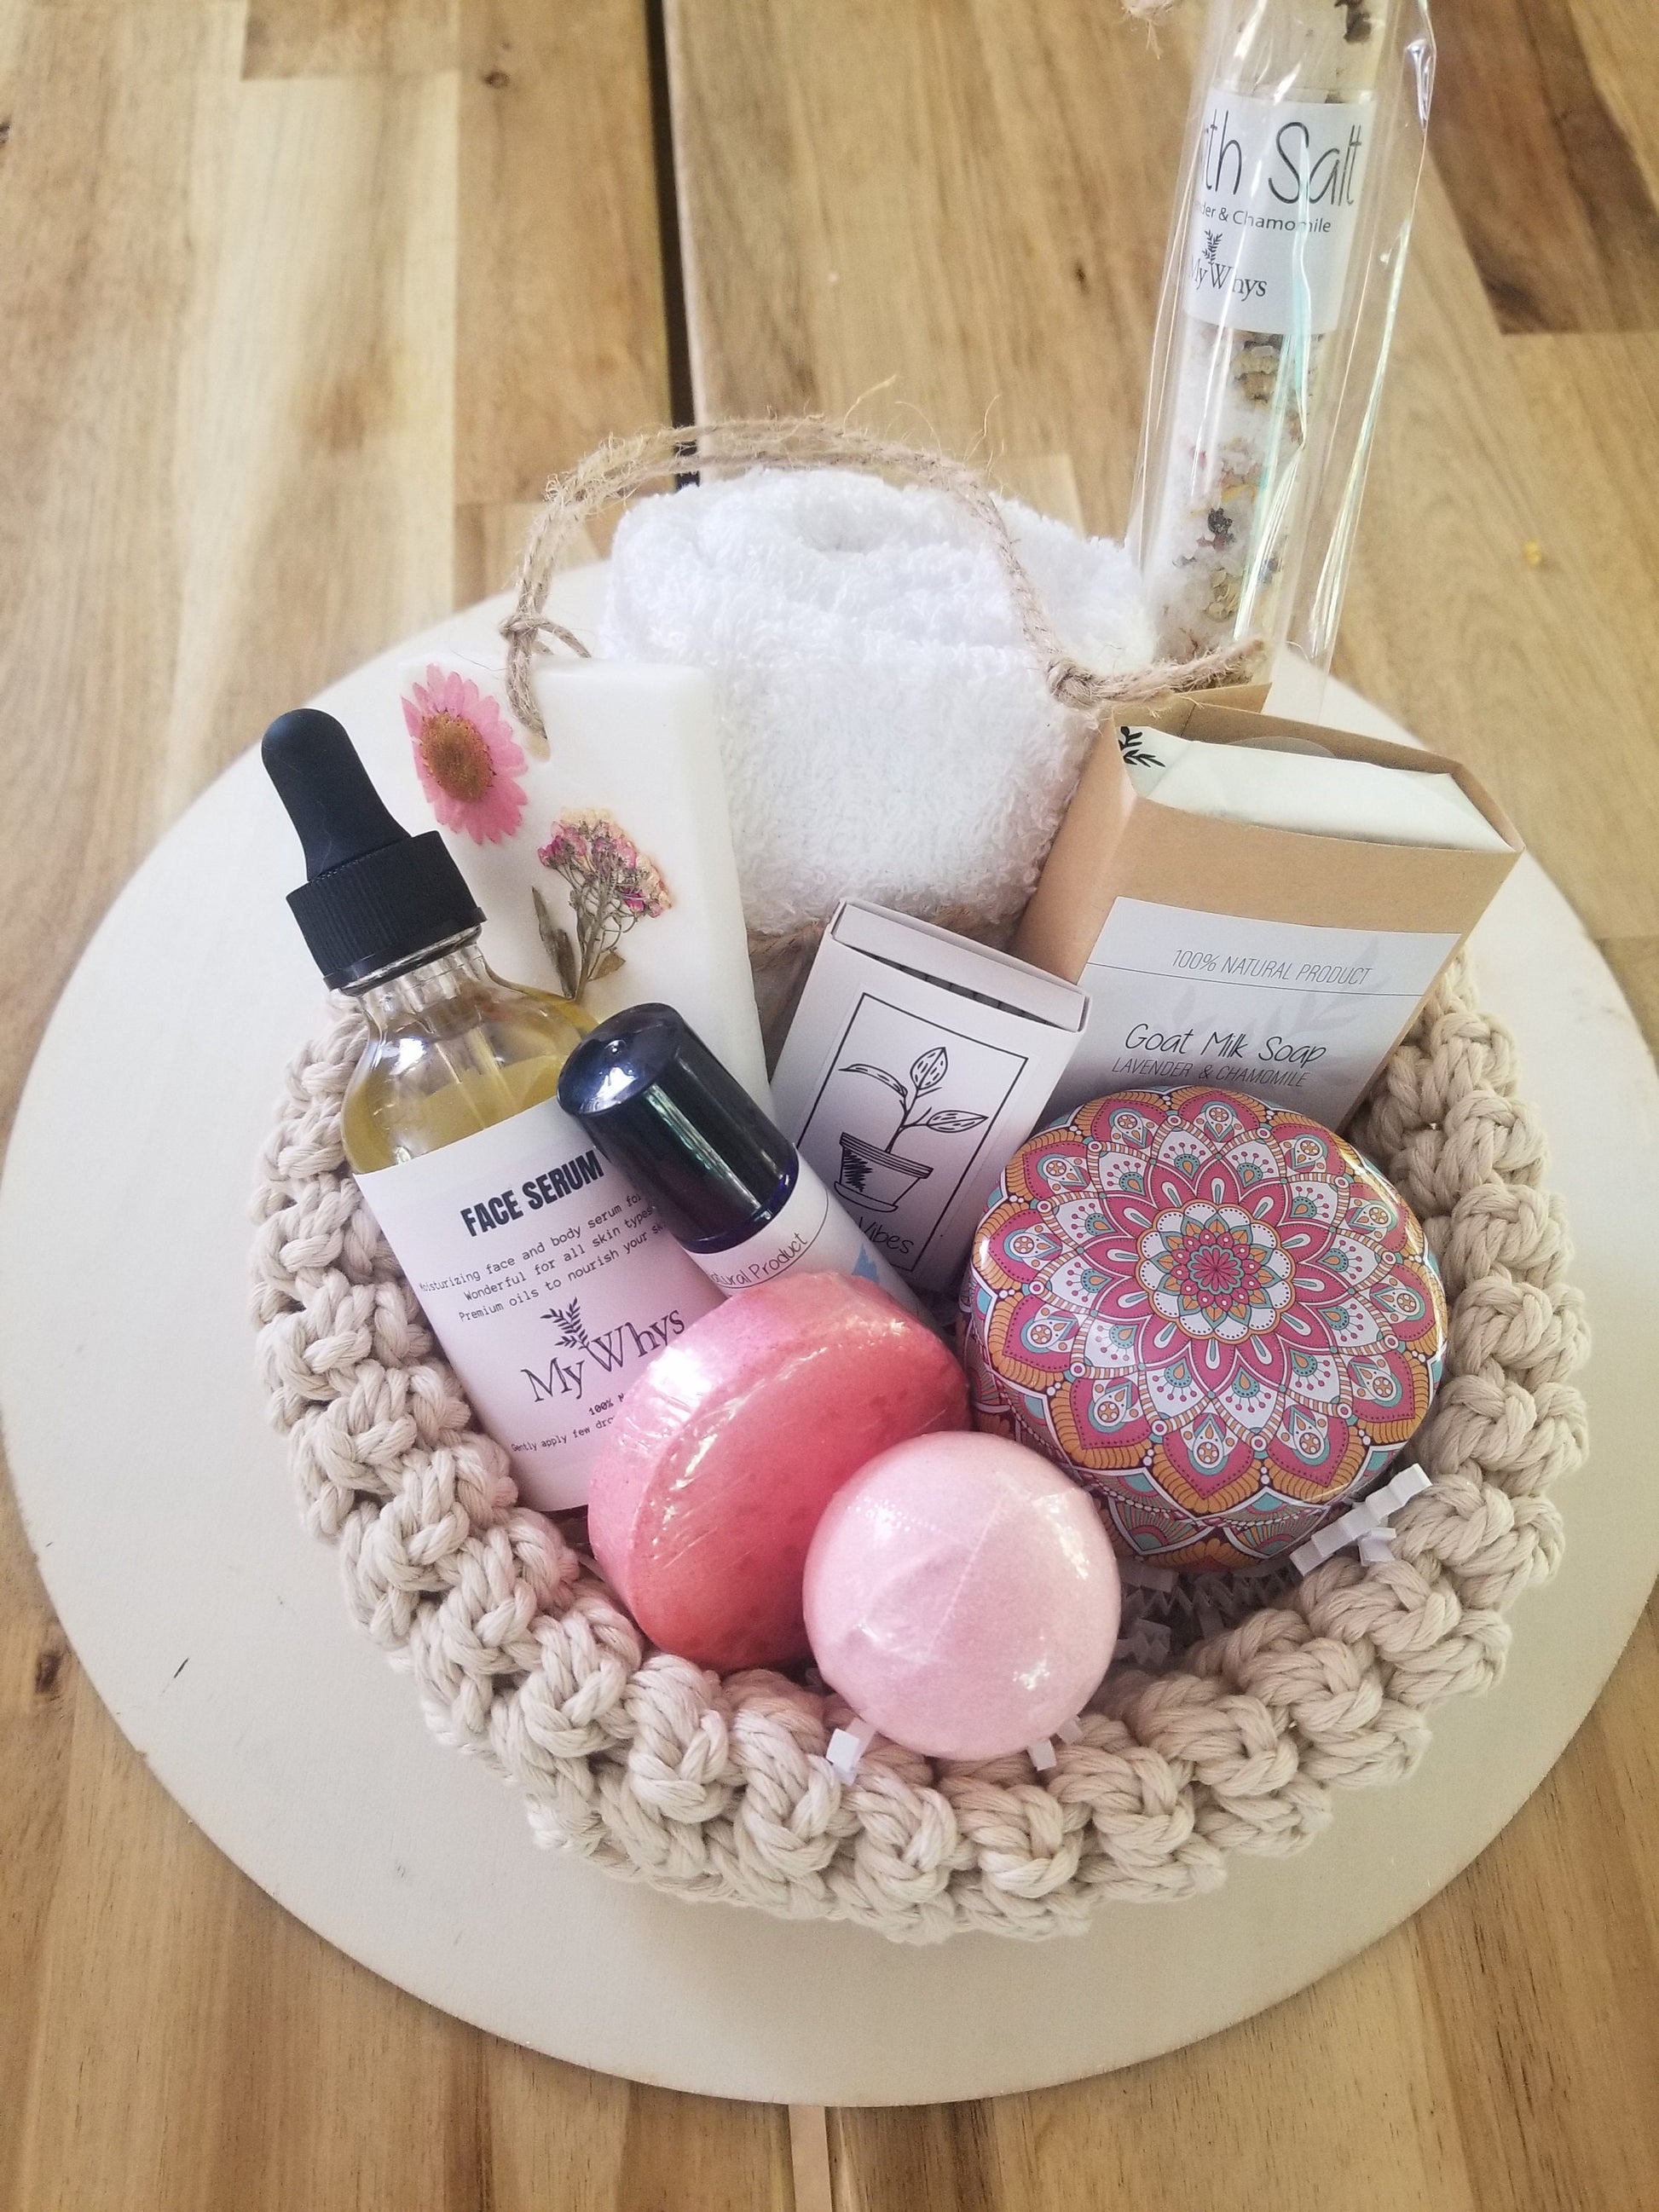 Spa Gift Set Valentine's Day Gift, Spa Gift Basket, Mother's Day Gift, Bath  Salts Gift Set, Self Care Box Gift for Wife 